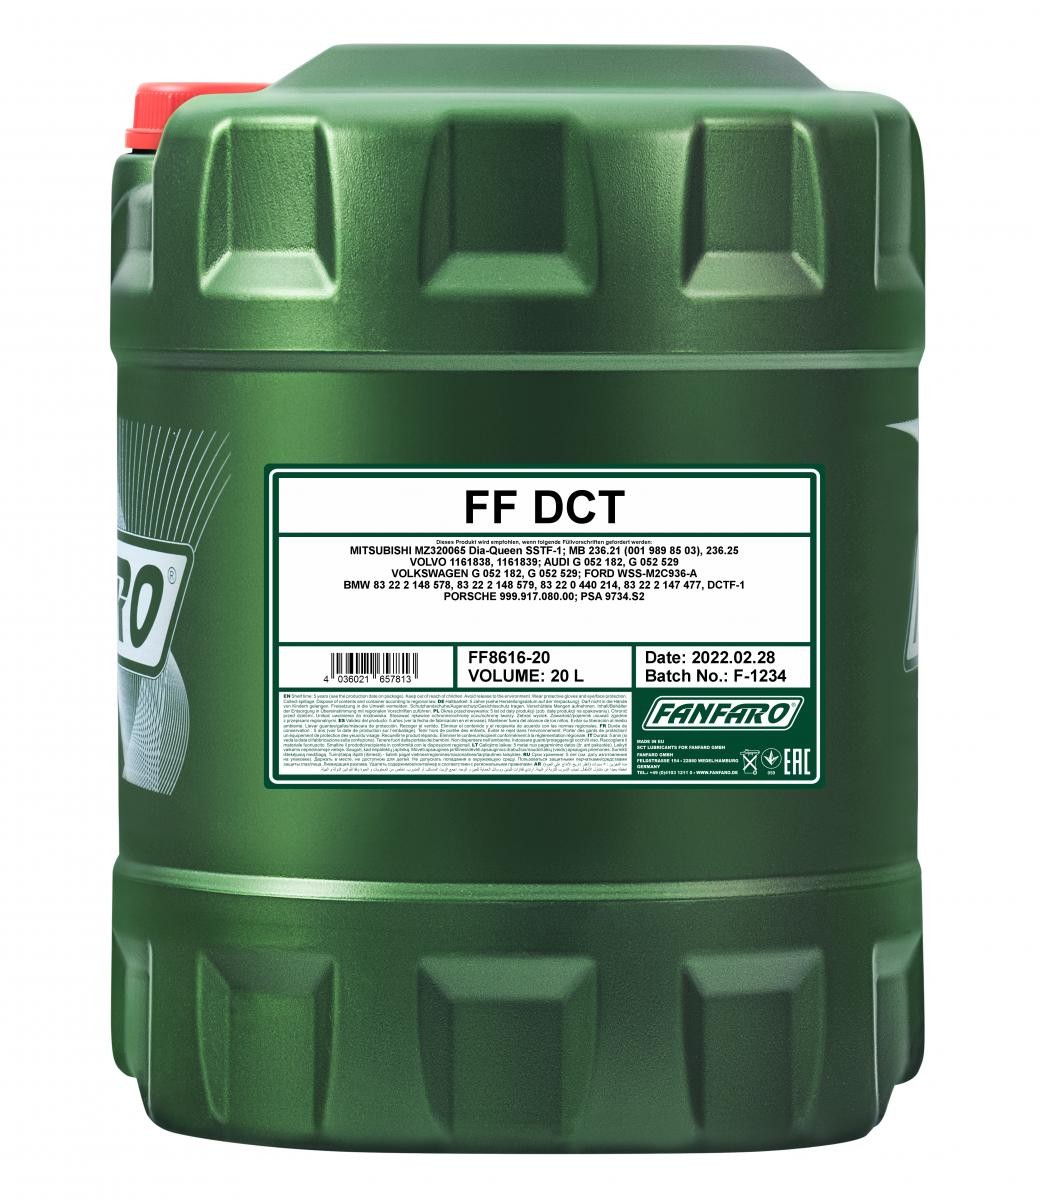 FANFARO FF8616-20 Manual Transmission Oil SEAT experience and price